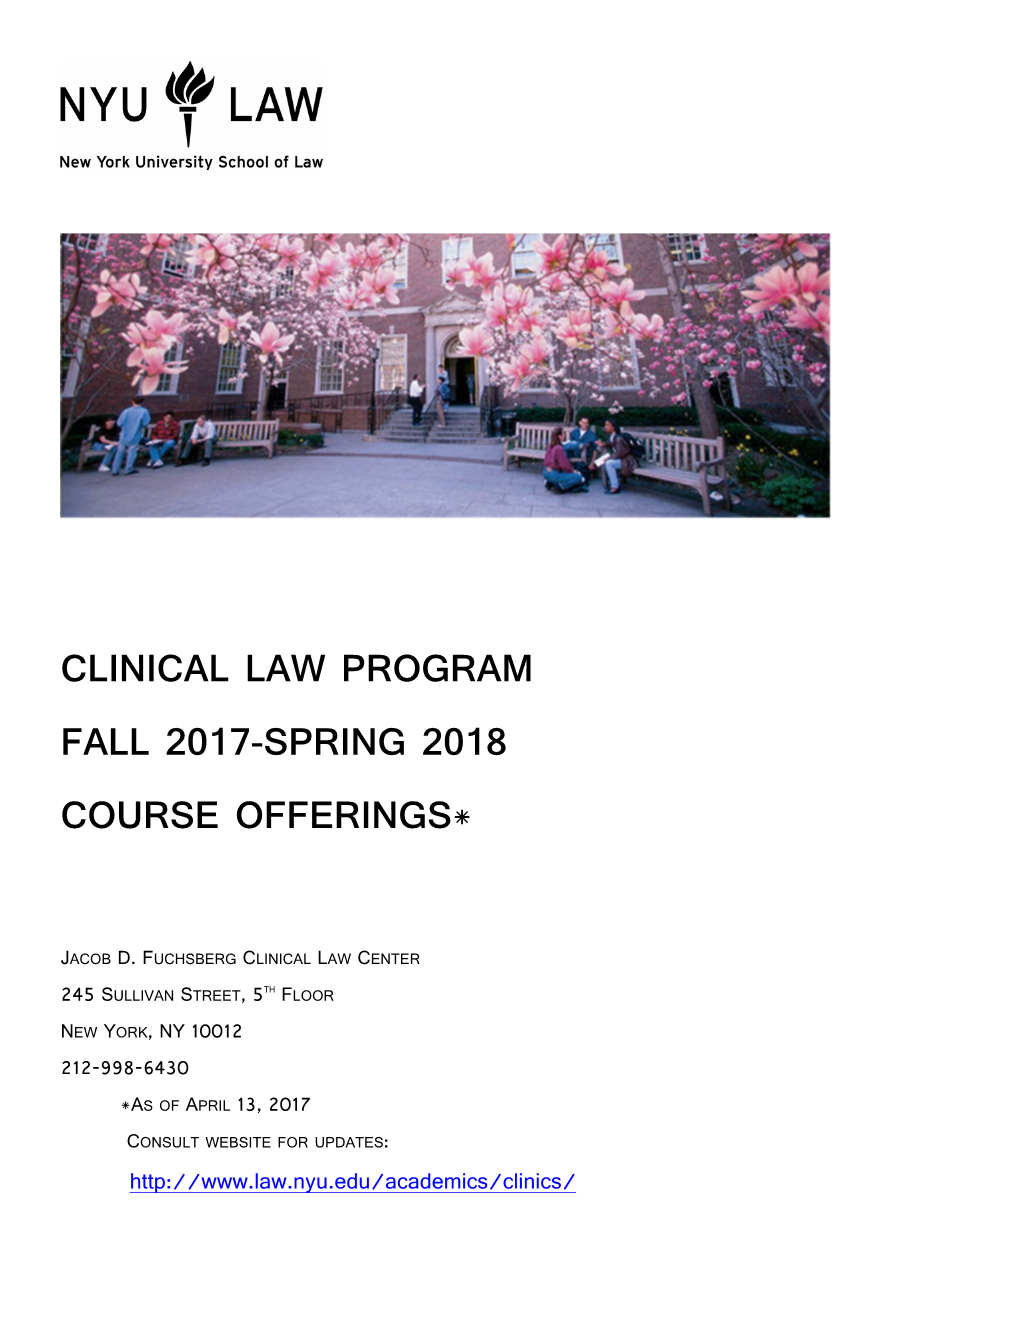 Clinical Law Program Fall 2017-Spring 2018 Course Offerings*